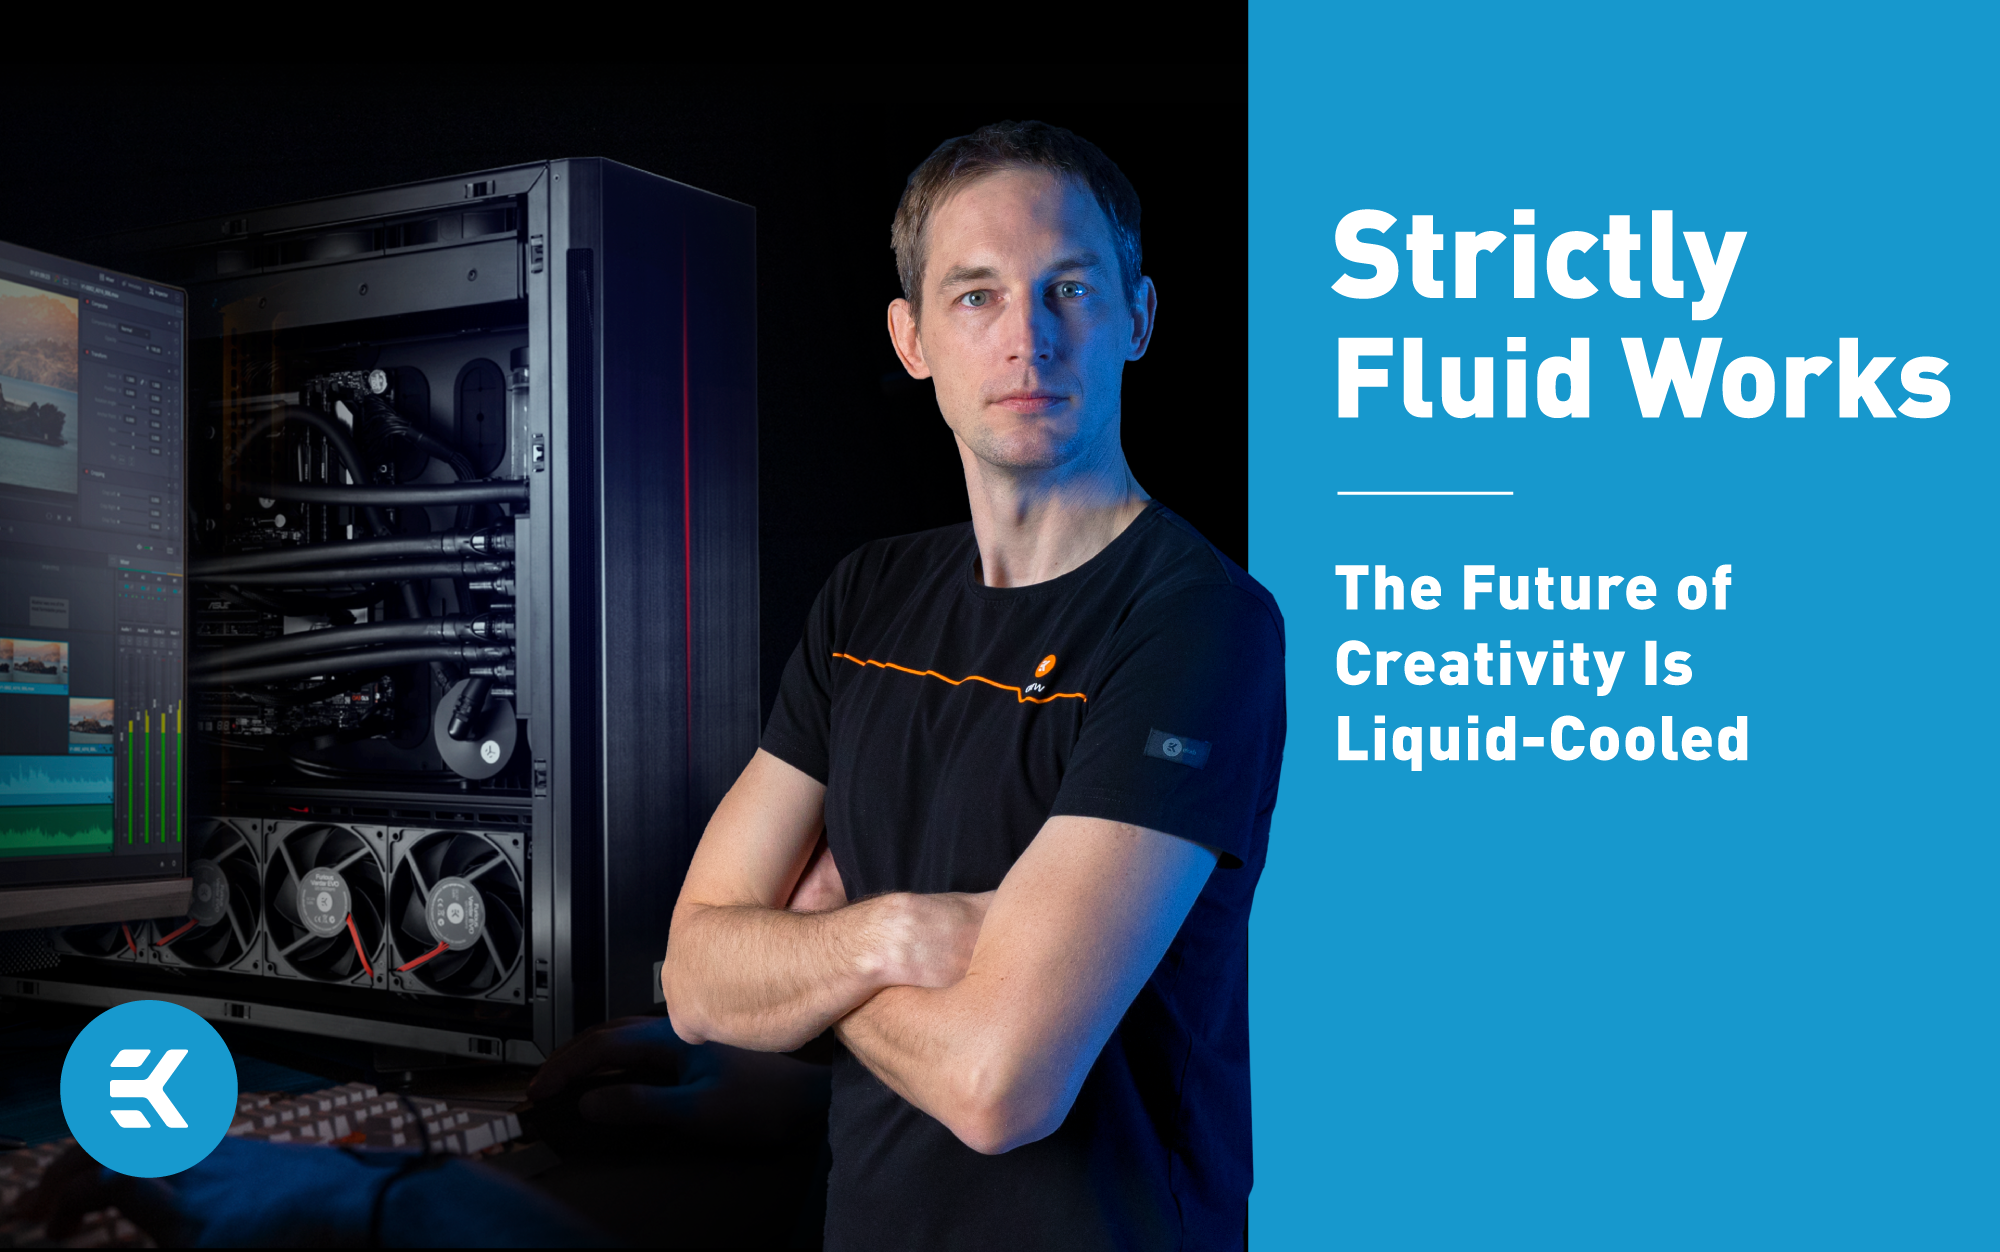 Strictly Fluid Works | The Future of Creativity Is Liquid-Cooled